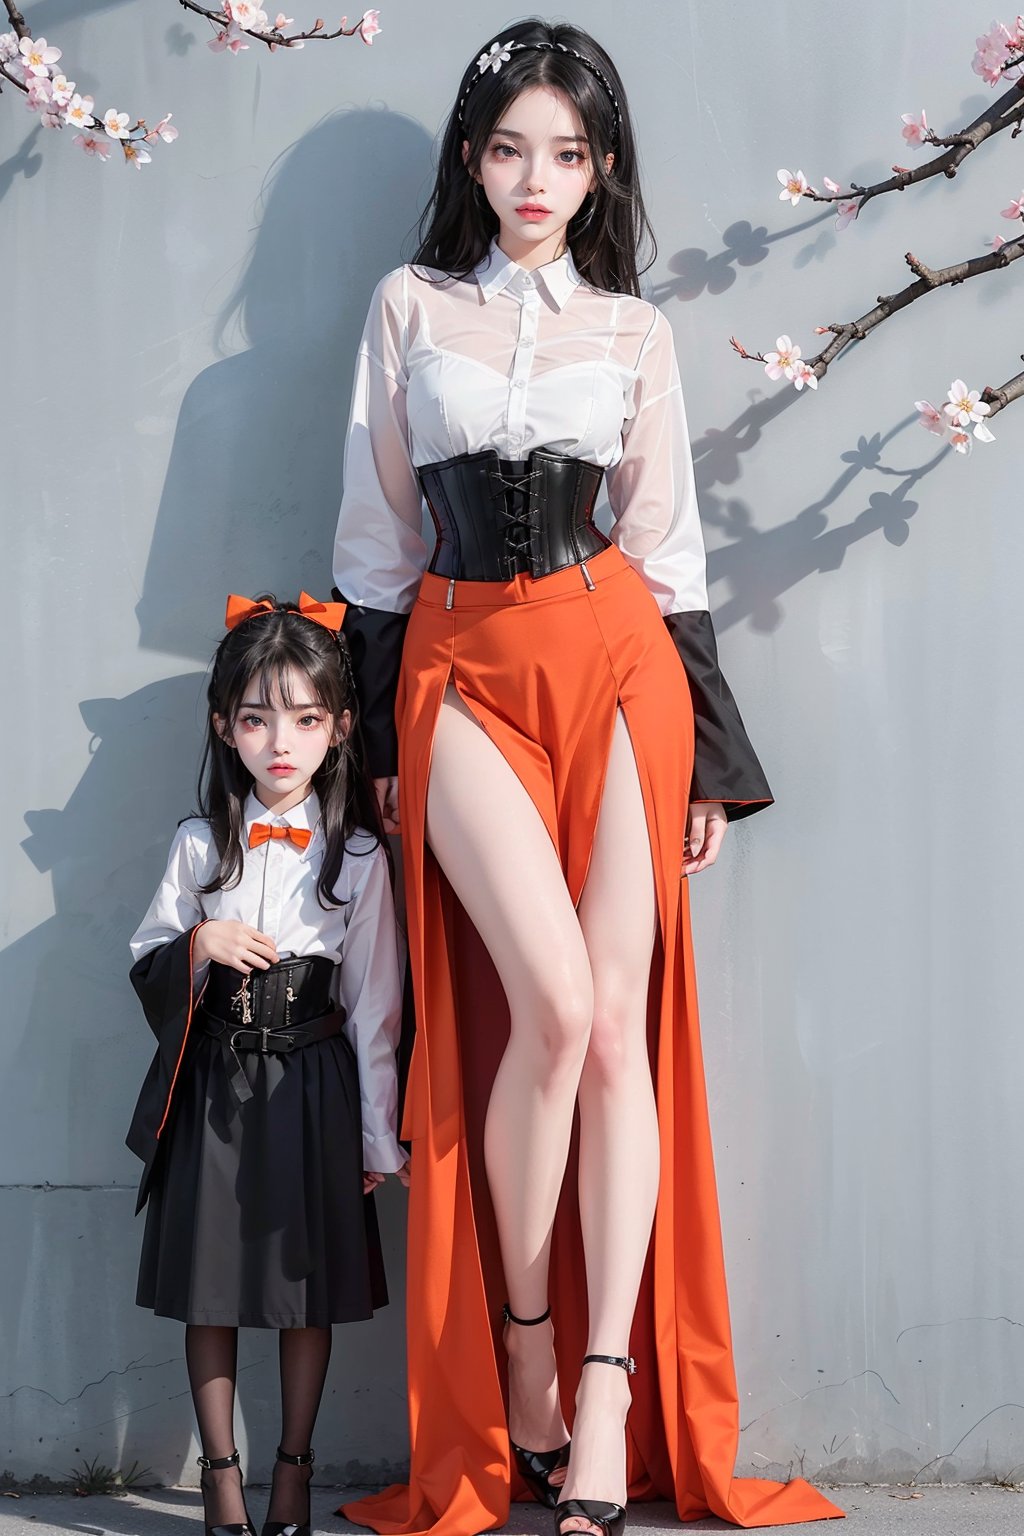 2girls,(((small girl and big girl))), different face, blush, blue eye, (white and black highlight hair: 1.4), (((fancy hair headband))), Donatella Versace designed: (((red full sleeve shirt))), and (((fancy orange long skirt))), (((waist fancy corset belts))), (((fancy knee high long heels))), stylish clothing, different clothing, messy_hair, (((simple cherry blossoms wall background))), nervous and embarrassed expression in their face, ((awsome posing)),medium full shot,two_girl,2girls,different_clothes